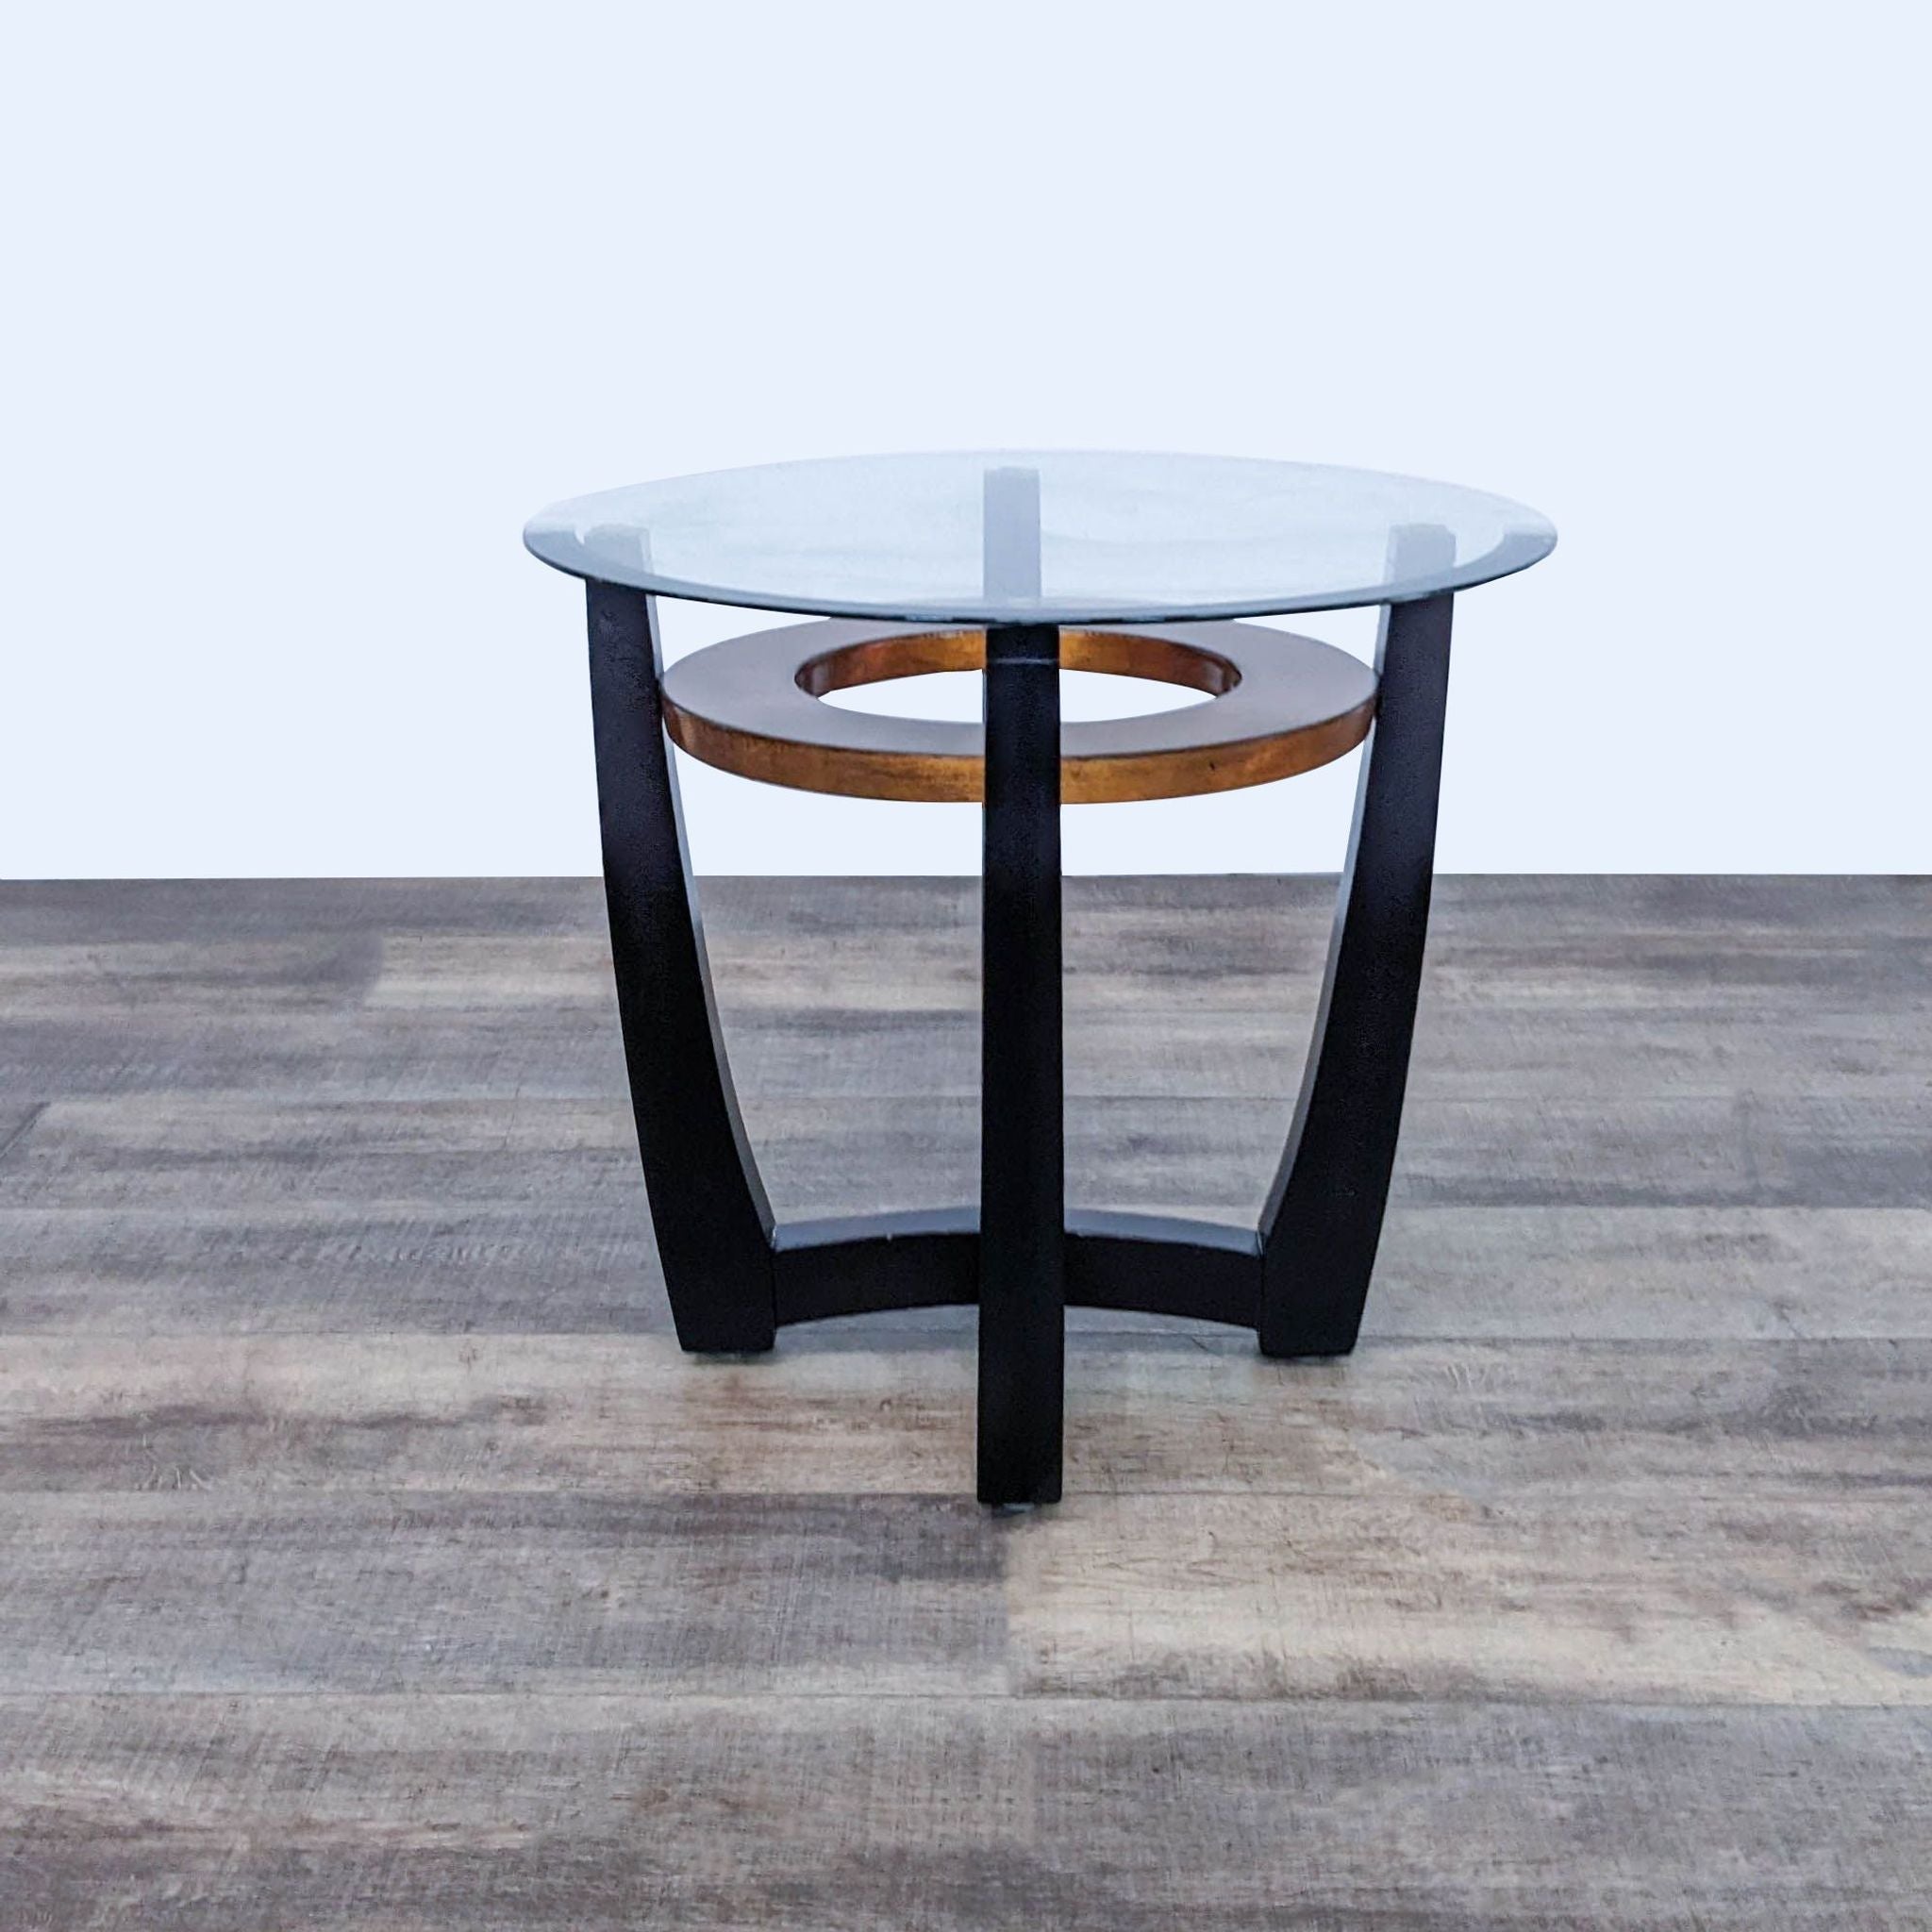 Top view of Reperch end table showing glass surface and round wooden detail on a black wood base.